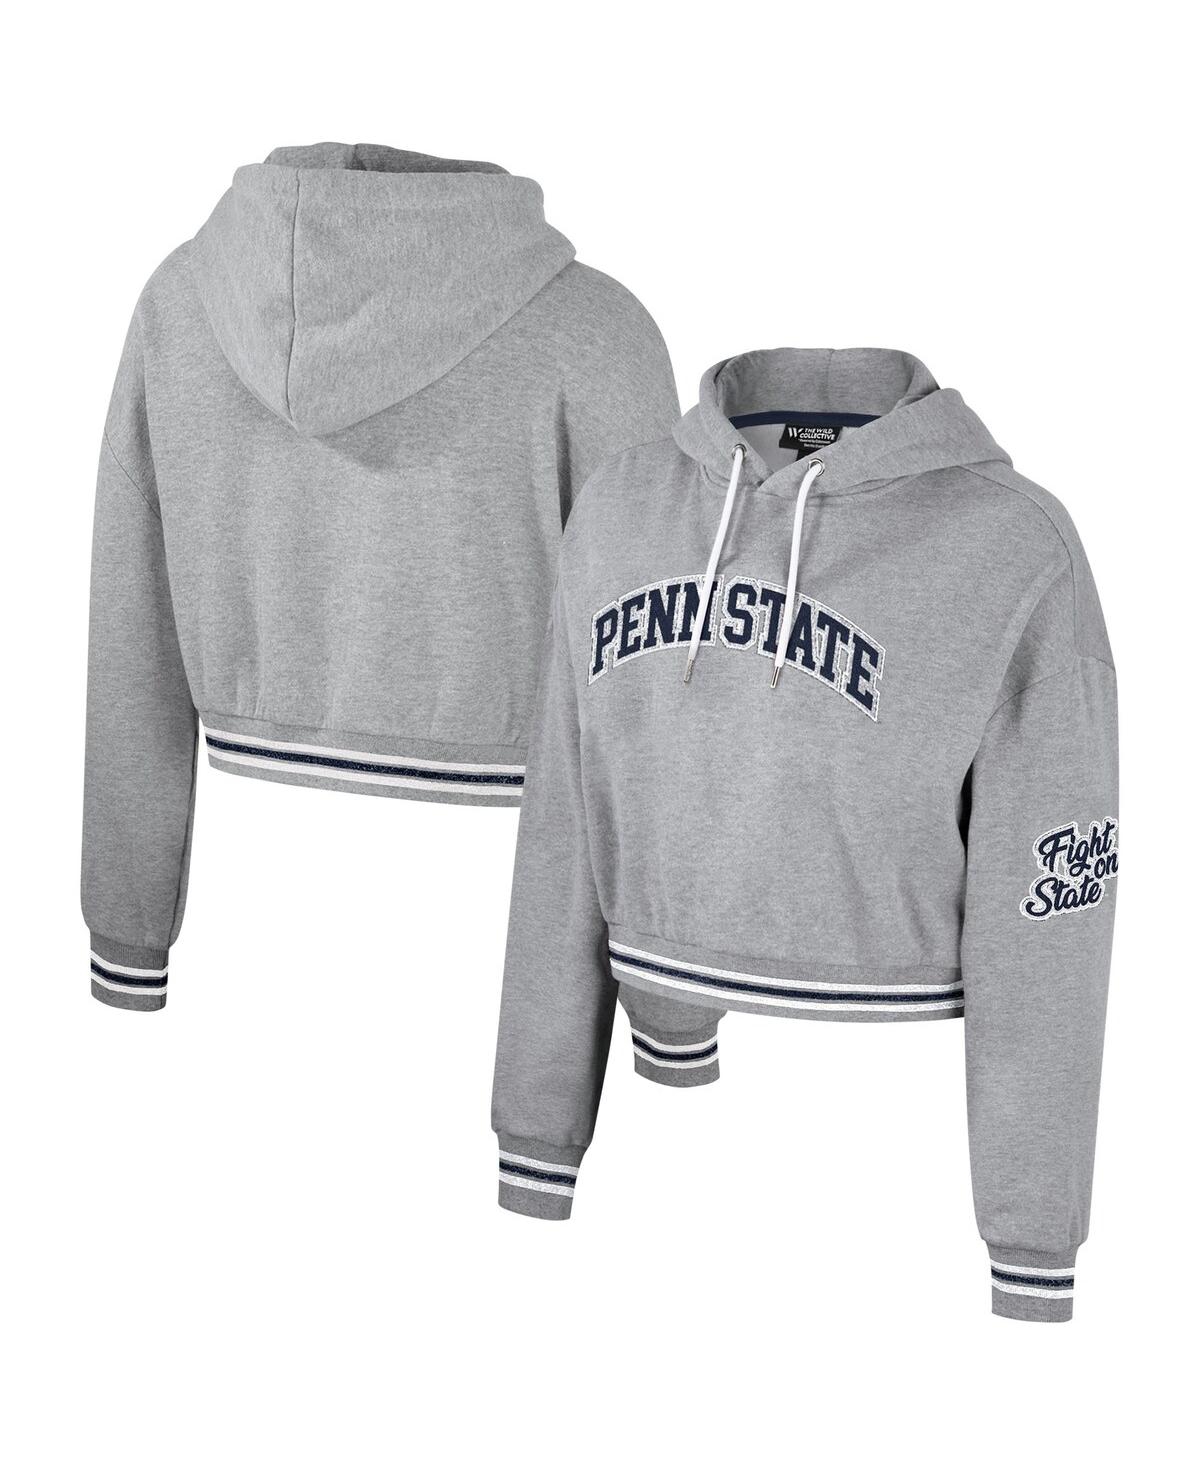 Women's The Wild Collective Heather Gray Distressed Penn State Nittany Lions Cropped Shimmer Pullover Hoodie - Heather Gray